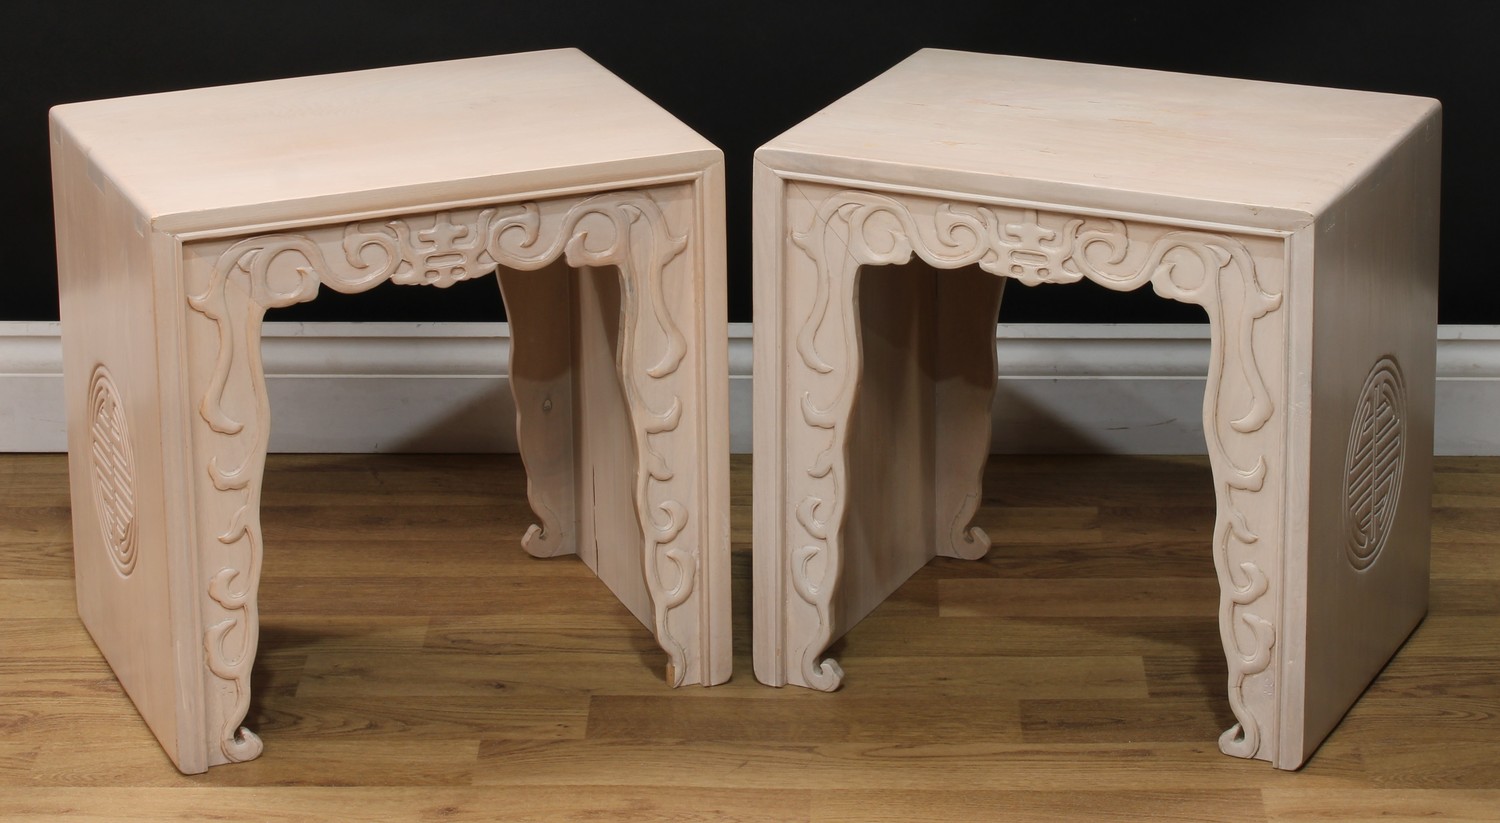 A pair of Chinese inspired tea tables or jardiniere stools, the sides impressed with the double